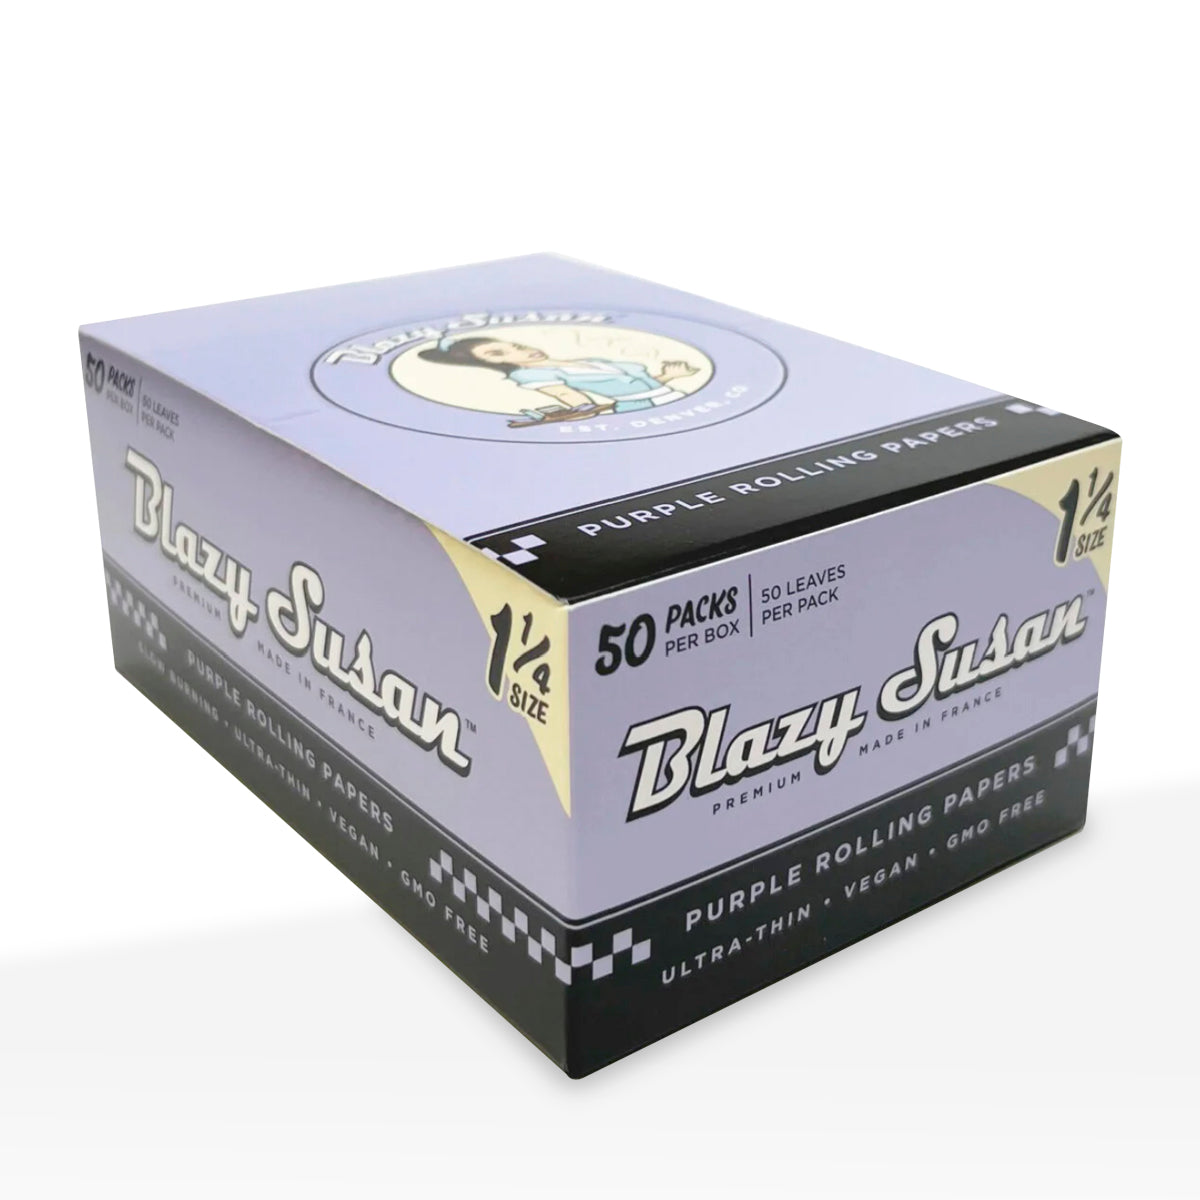 Blazy Susan 1 1/4" Purple Rolling Papers - 50 Pack